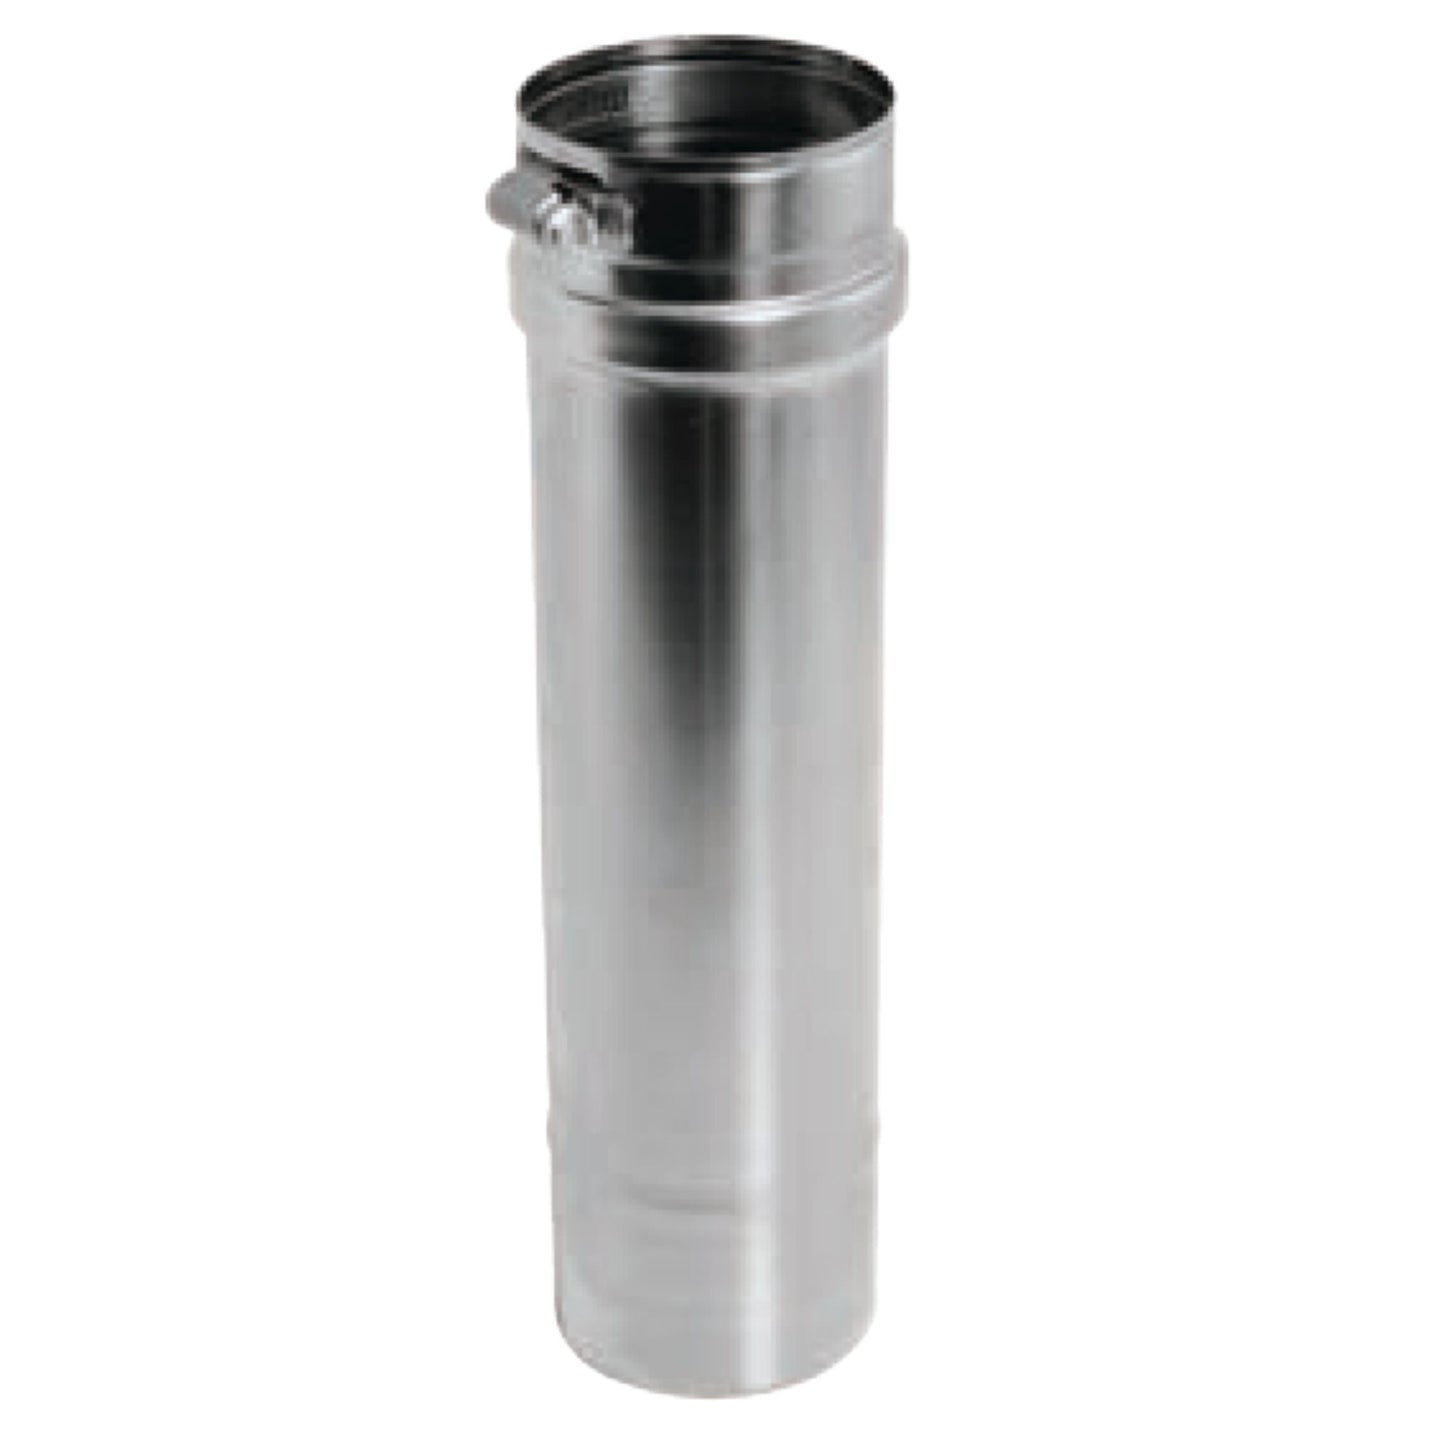 DuraVent FasNSeal 3" x 36" 316L Stainless Steel Vent Length